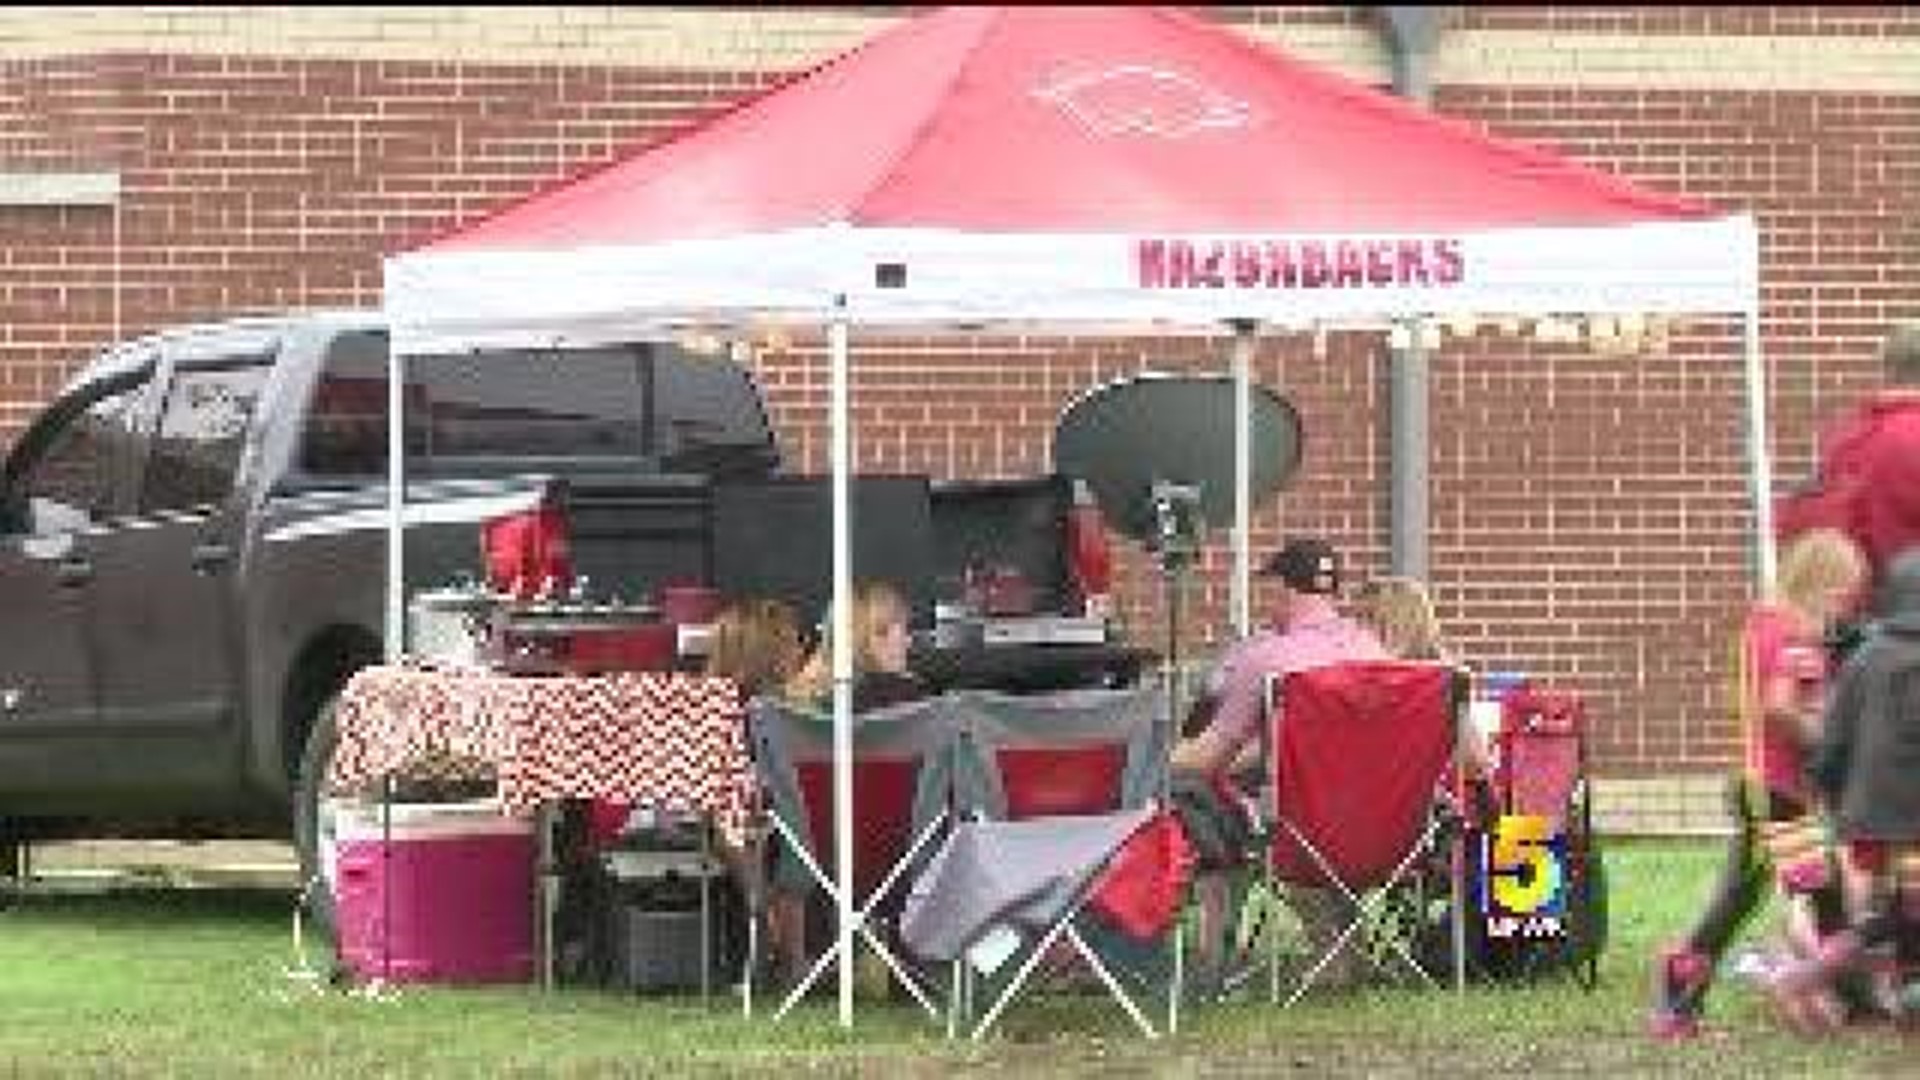 First Home Games Brings Out Thousands Of Tailgaters